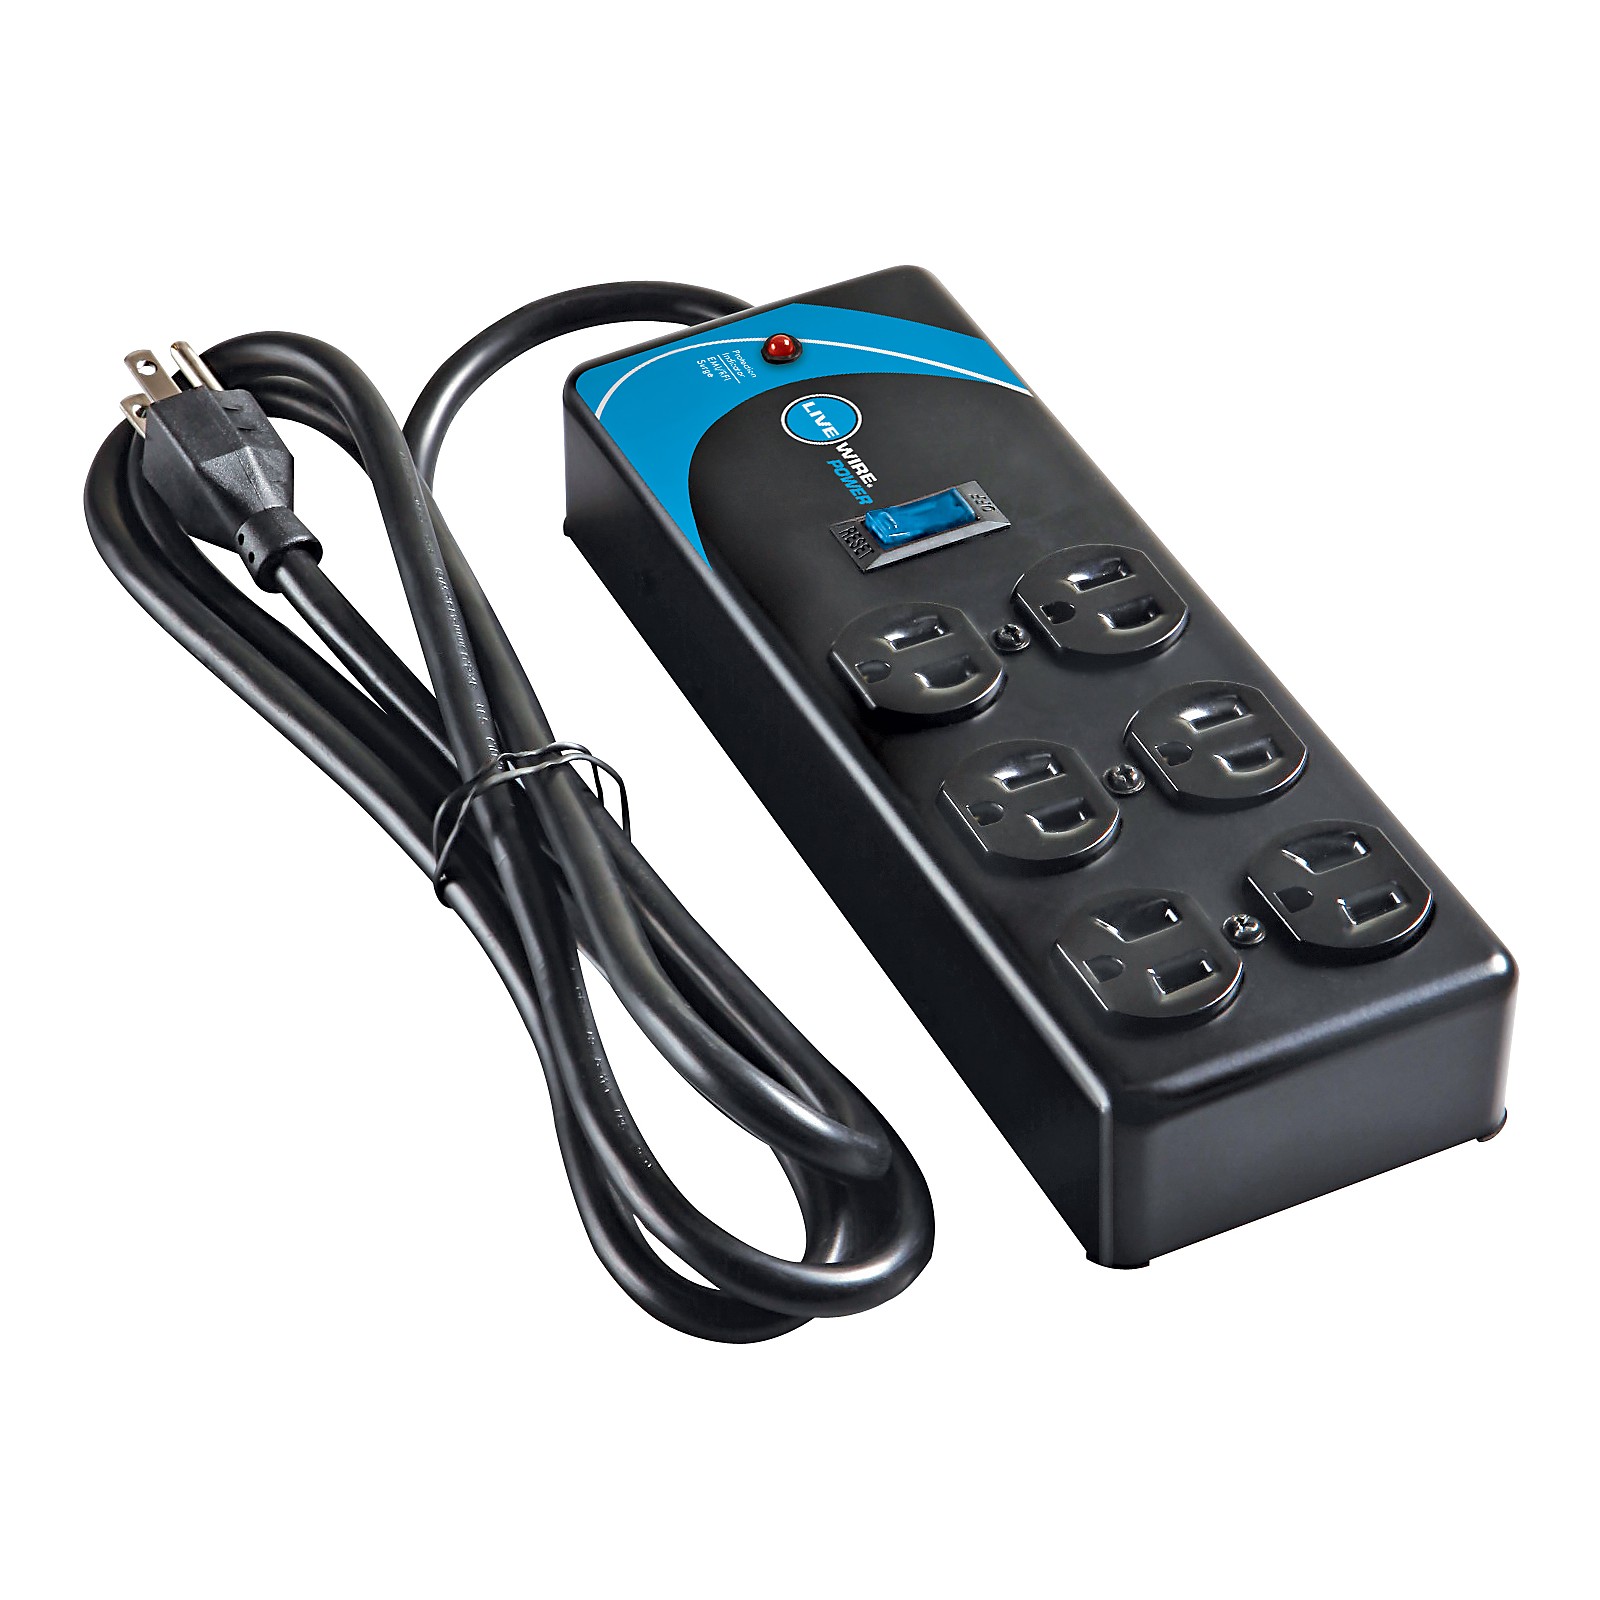 Livewire Power Strip and Surge Protection With 10' Cord